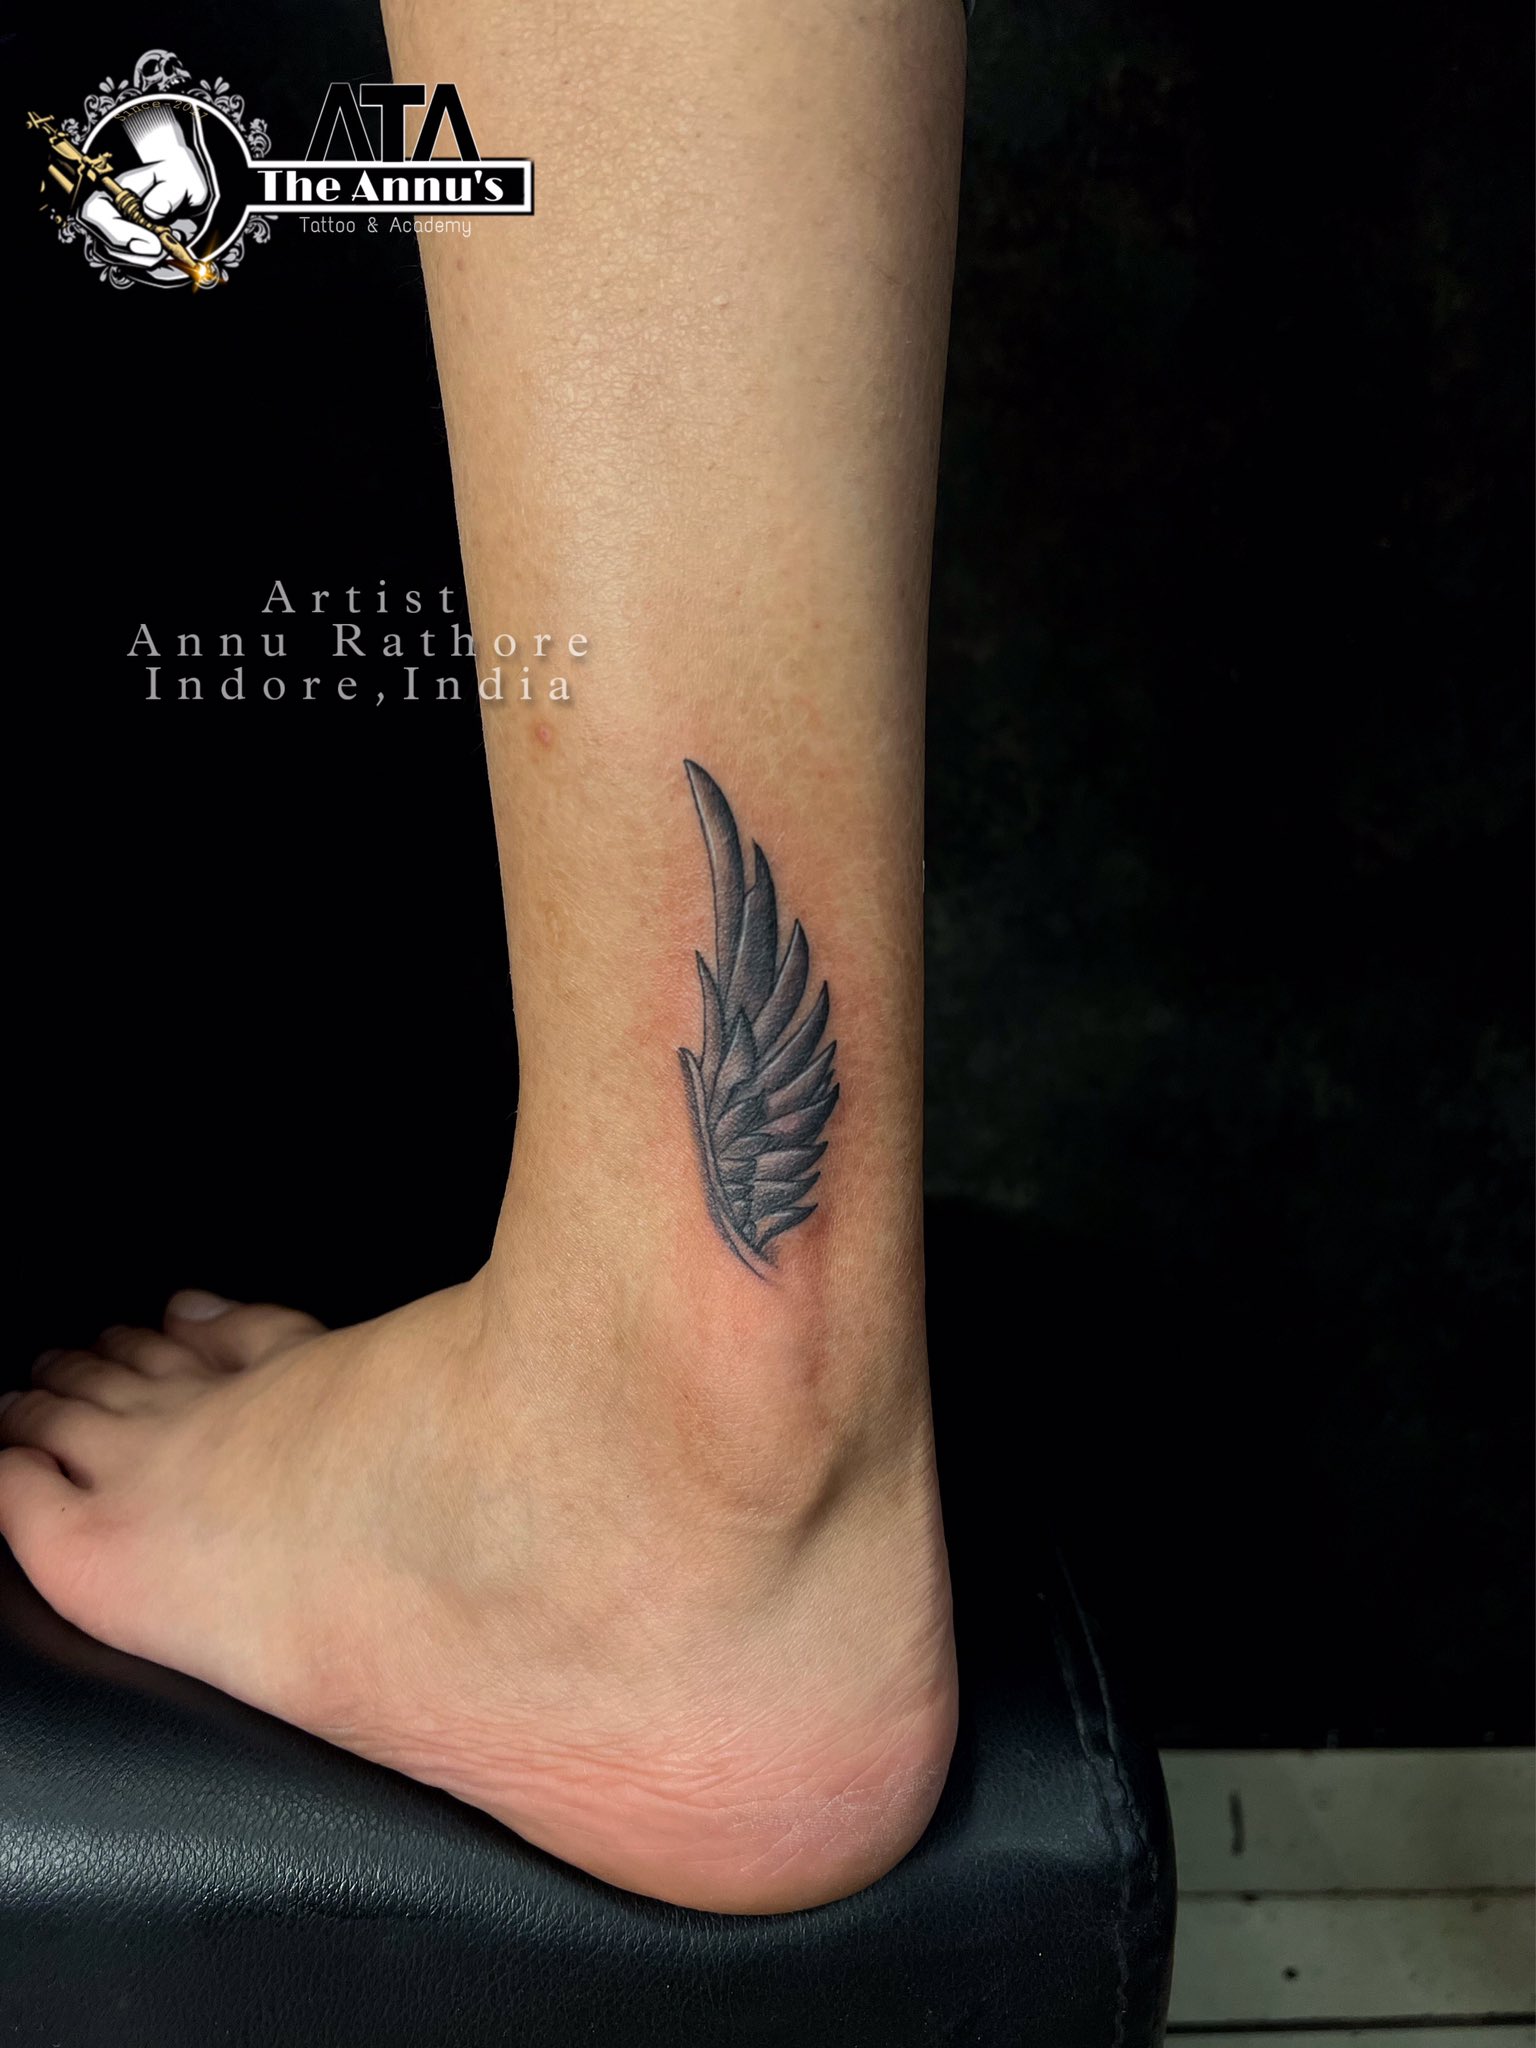 Share 138+ ankle tattoos best